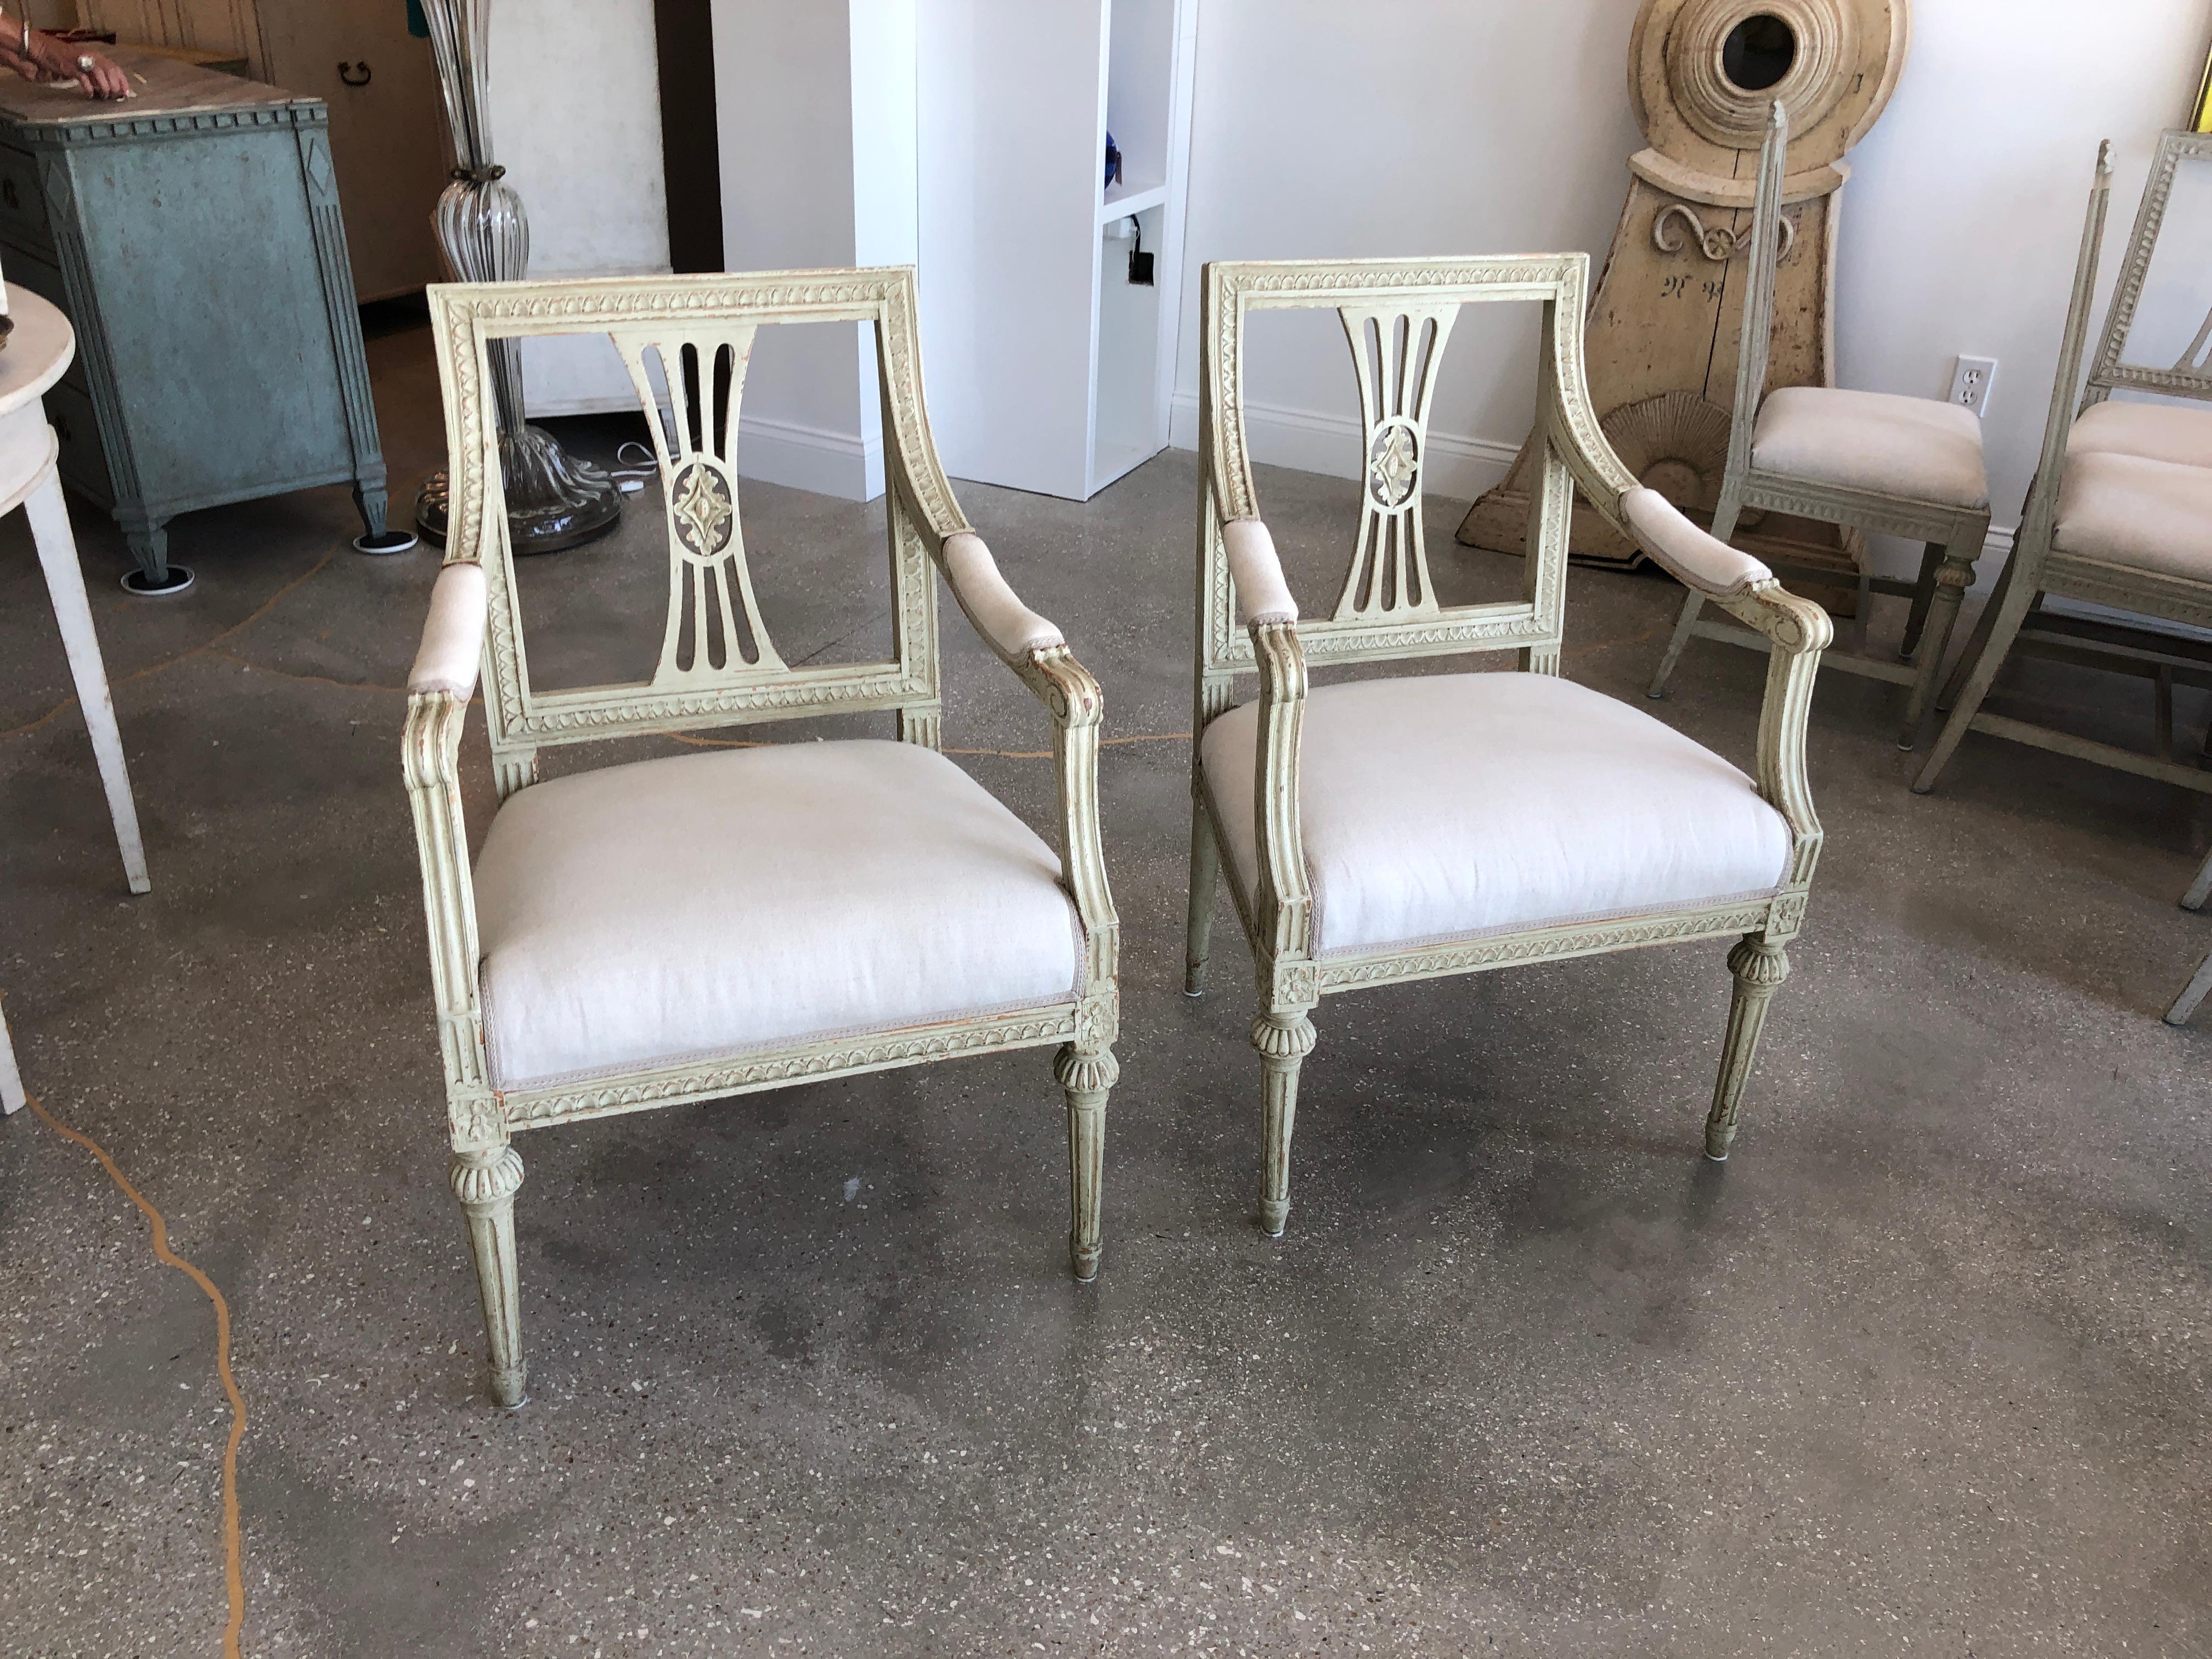 Pair of antique Swedish late Gustavian armchairs, painted in lovely greyish-green distressed finish. Squared backs with carved egg and dart border, graceful curved arms with an upholstered fabric pad. Openwork splat back with carved rosette in